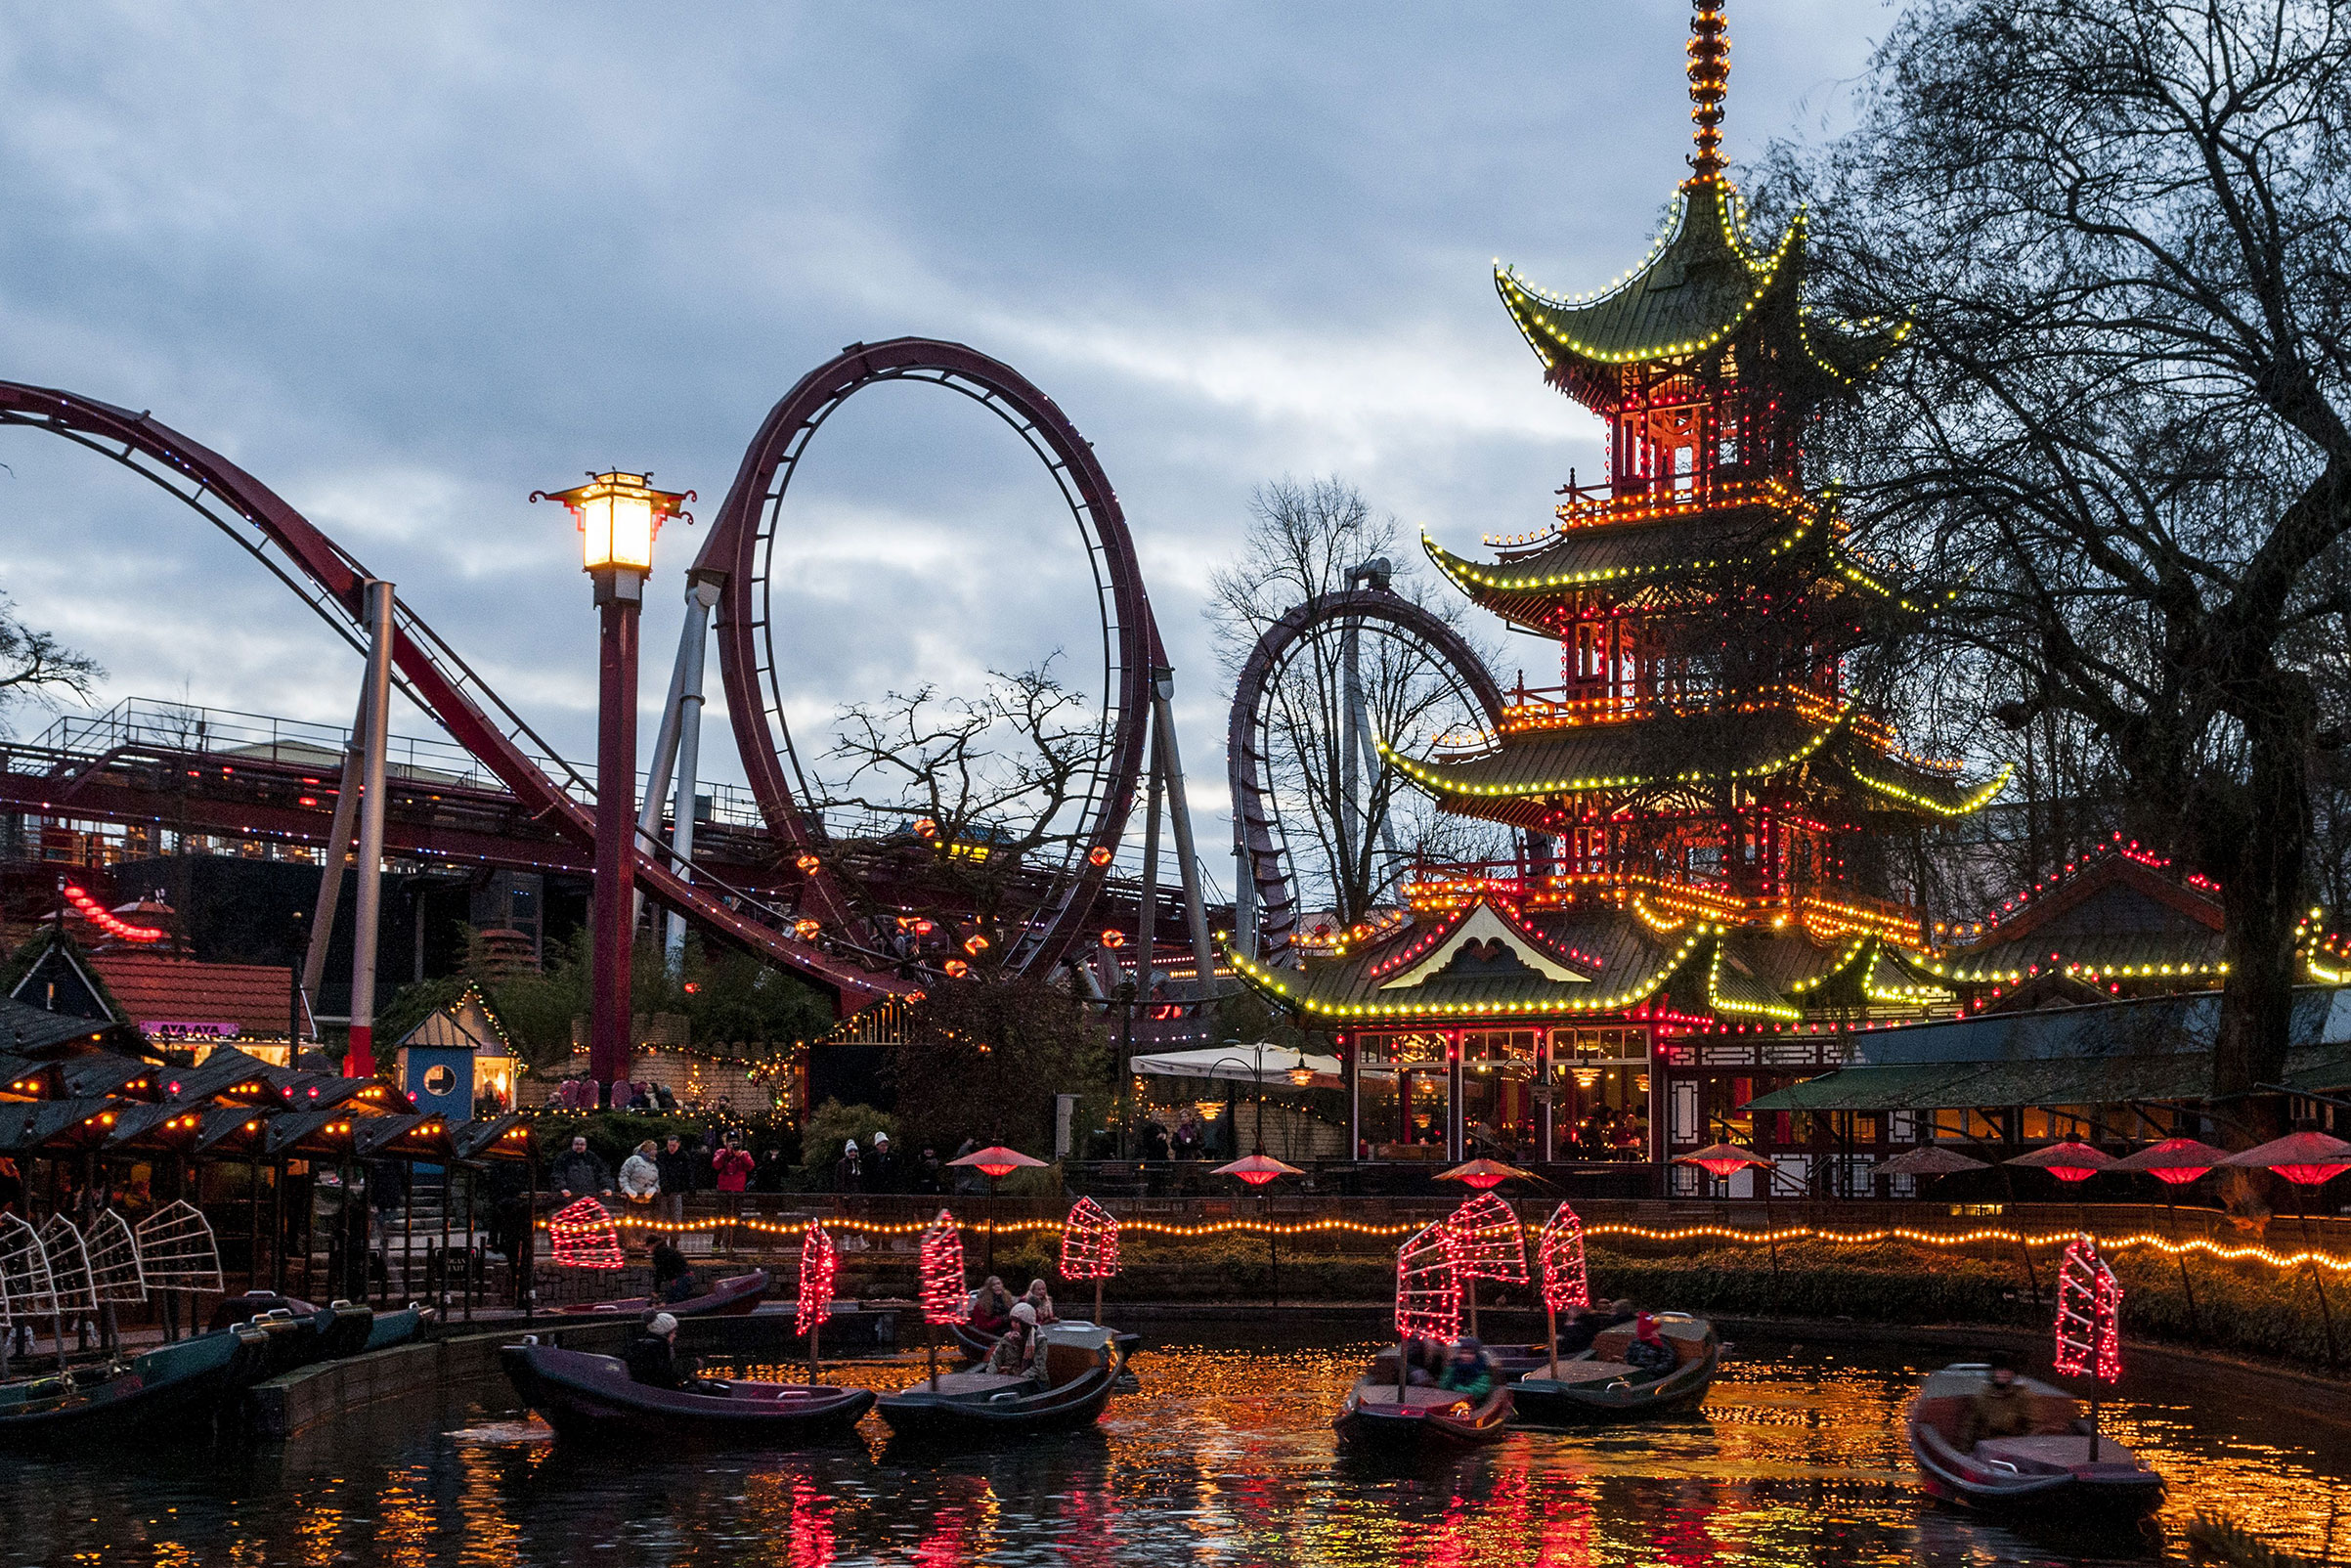 Tivoli Gardens Is One of the World's Greatest Places 2018 | Time.com